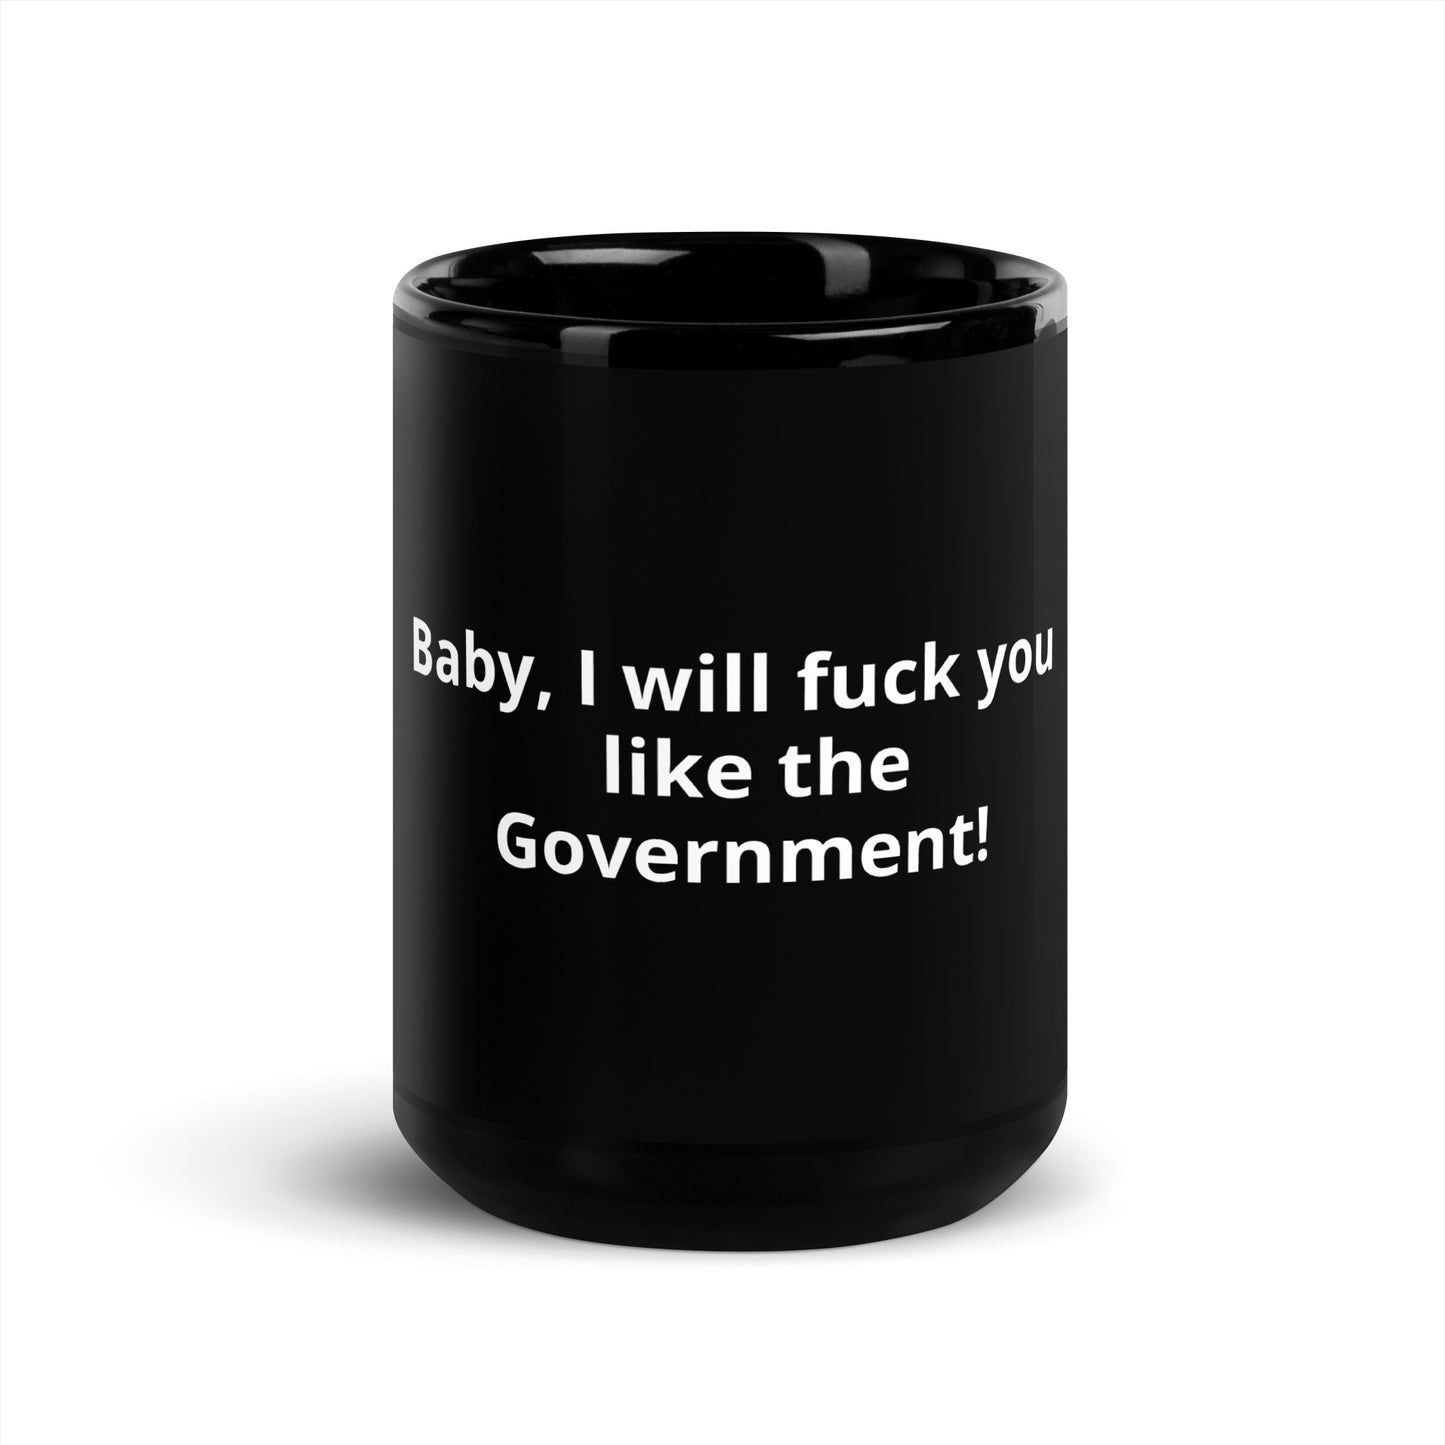 Baby, I will fuck you like the government!